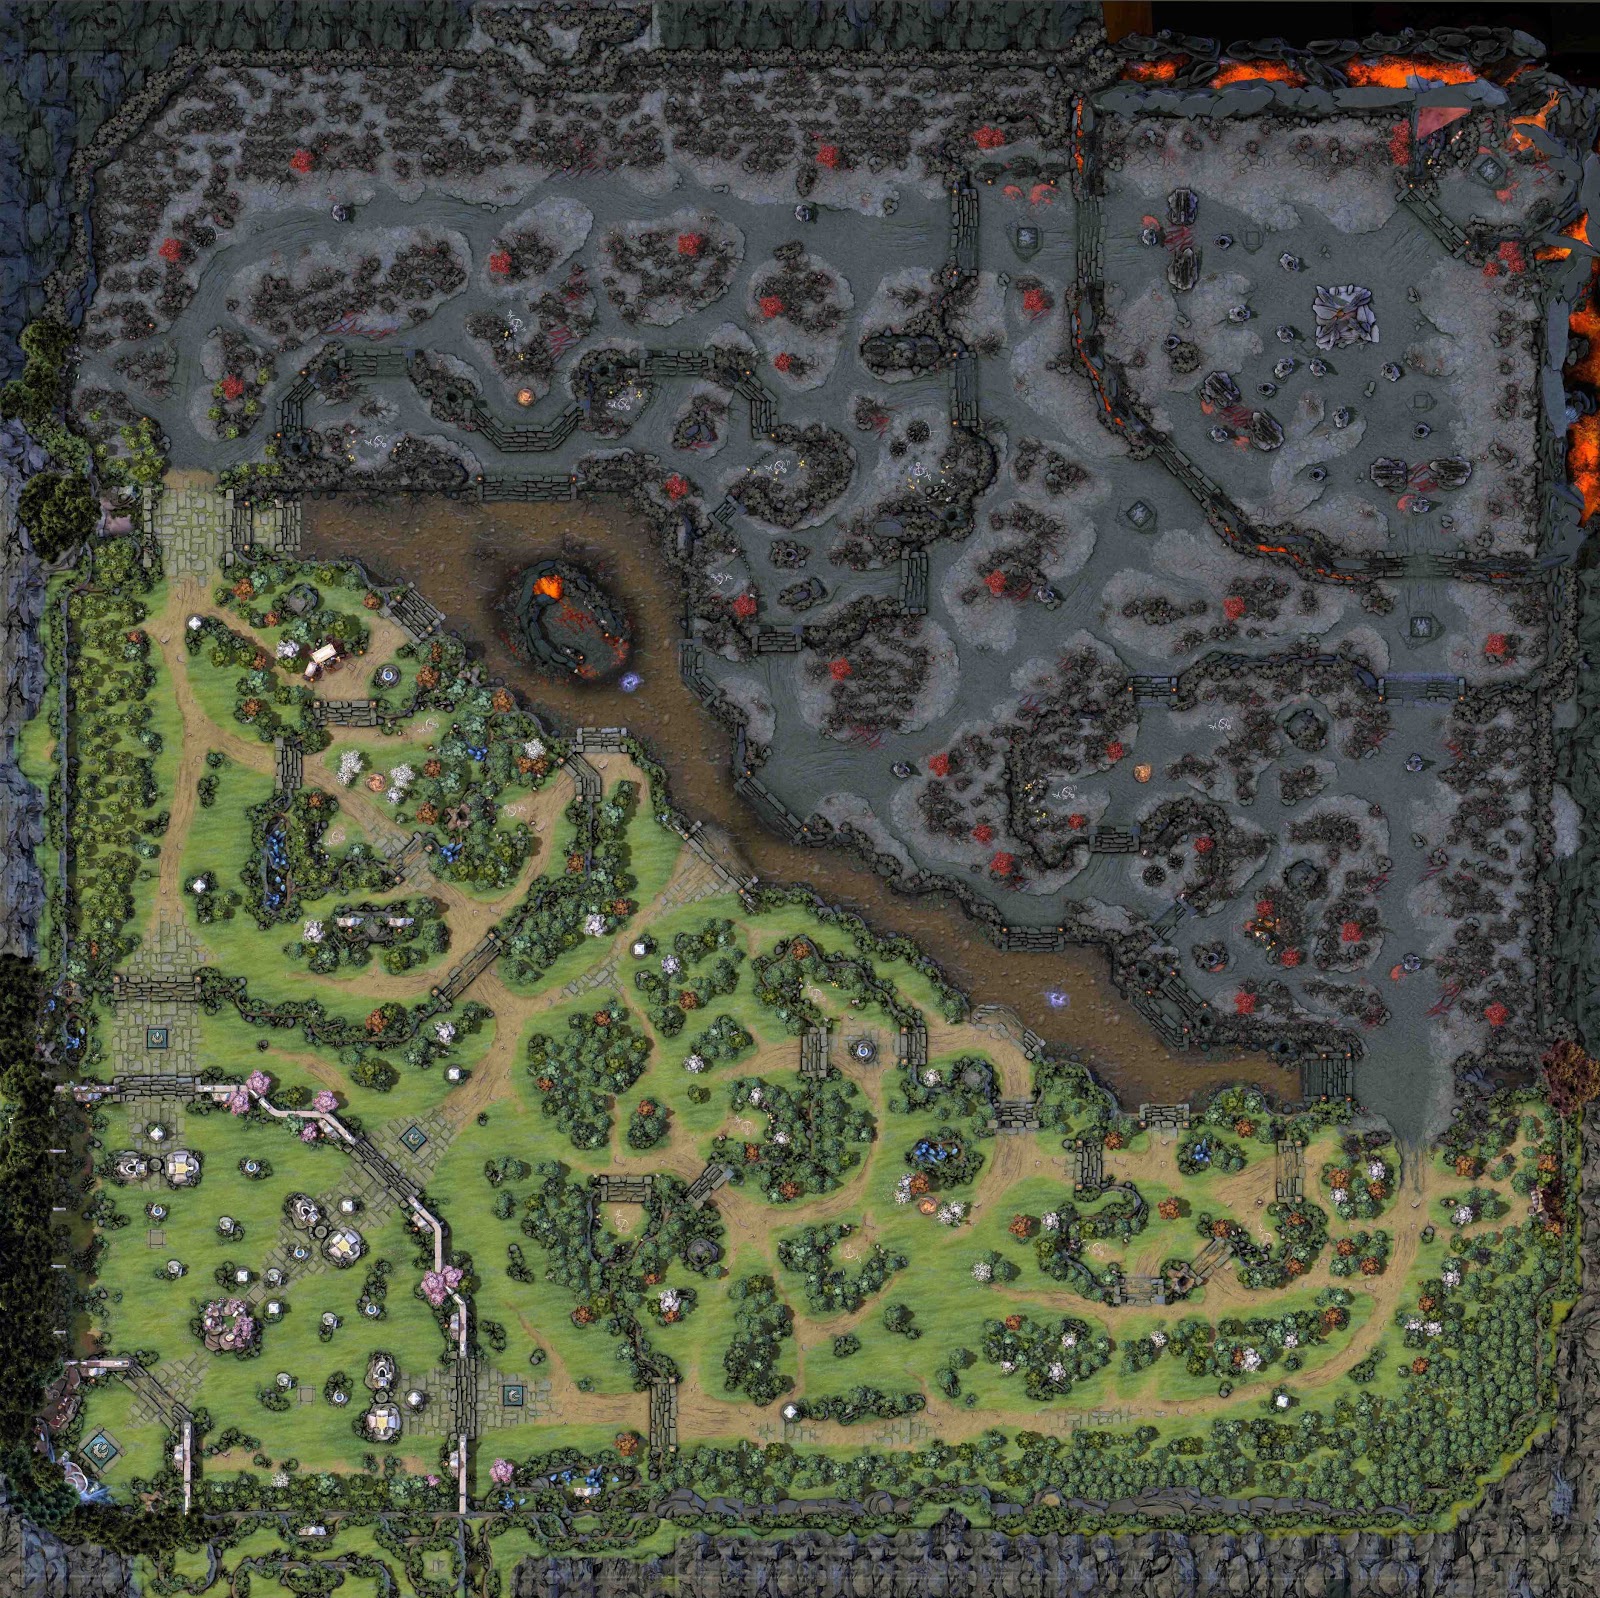 A Newcomer’s Guide To Watching Dota 2’s $29 Million International Tournament